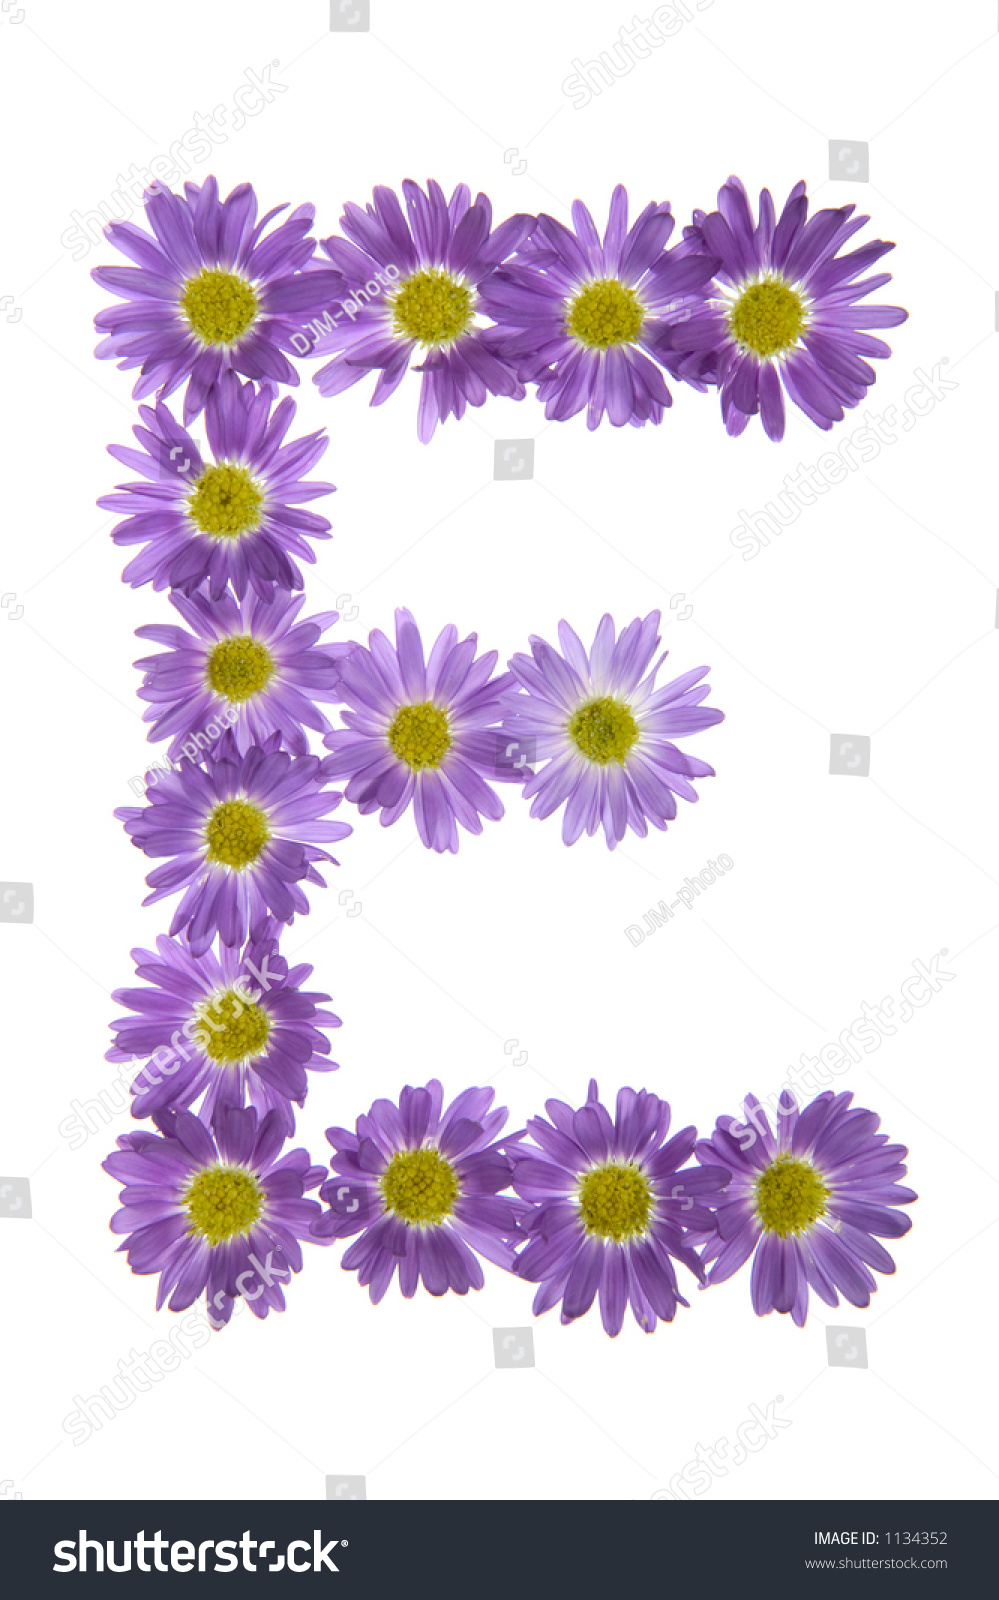 Flowers Arranged Into The Shape Of The Letter E On A Pure White